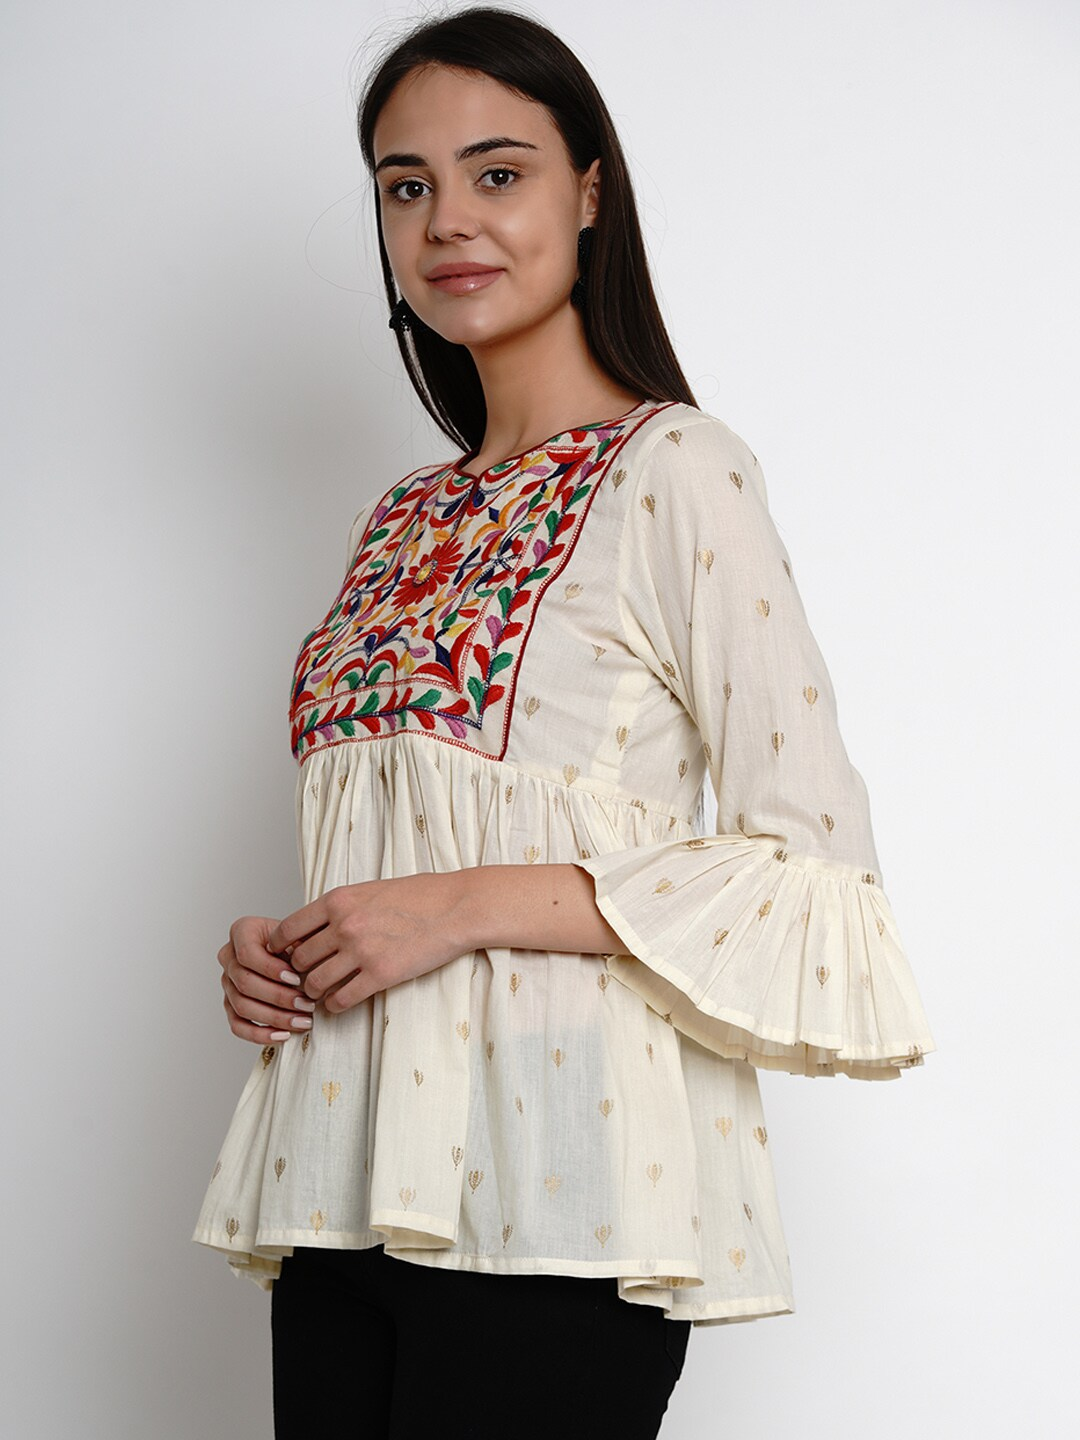 Women's  Off-White & Red Embroidered Peplum Top - Wahe-NOOR